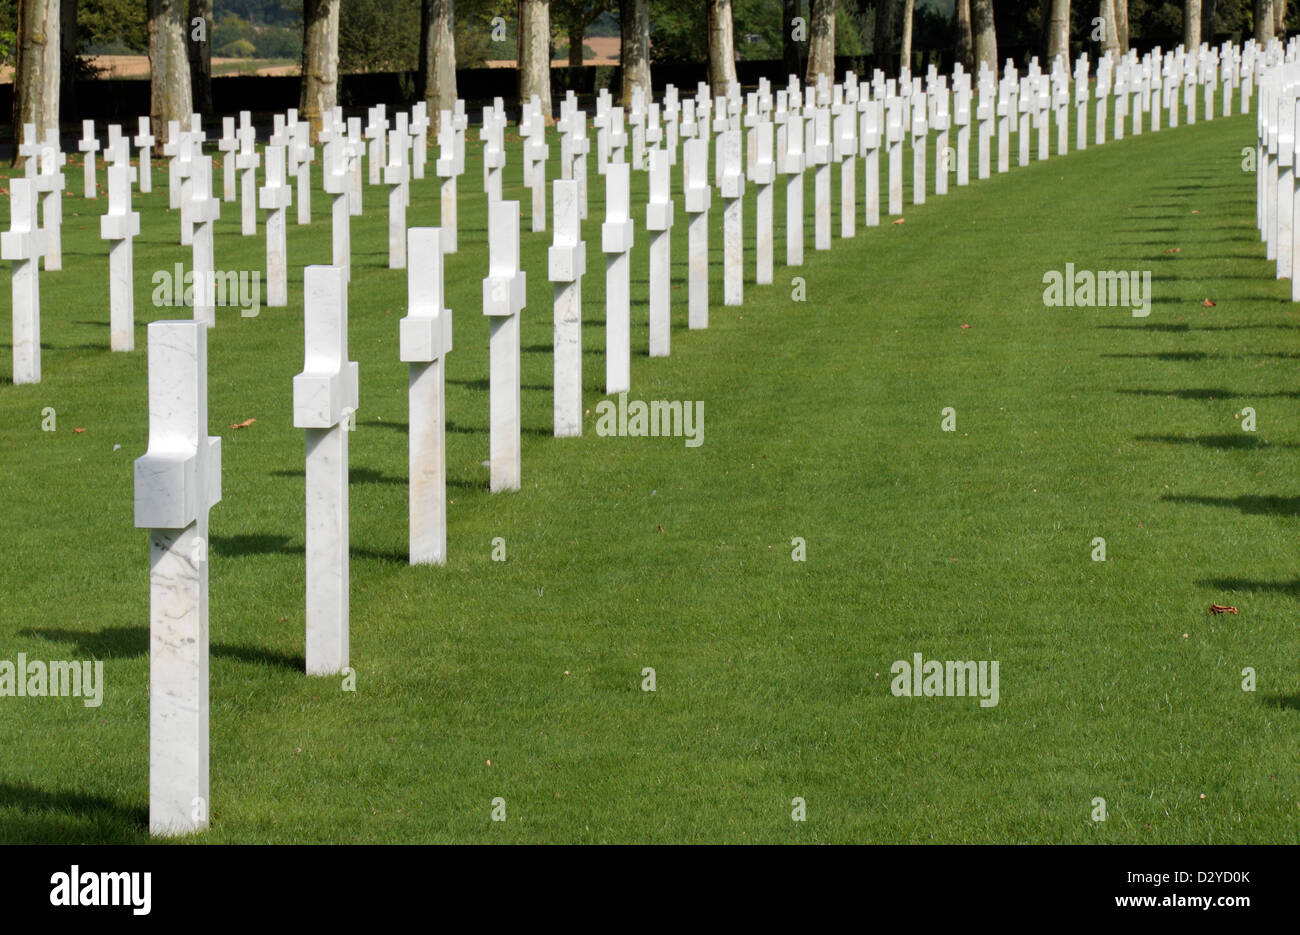 Headstones in the Aisne-Marne American Cemetery and Memorial, Belleau, near Chateau-Thierry, France. Stock Photo